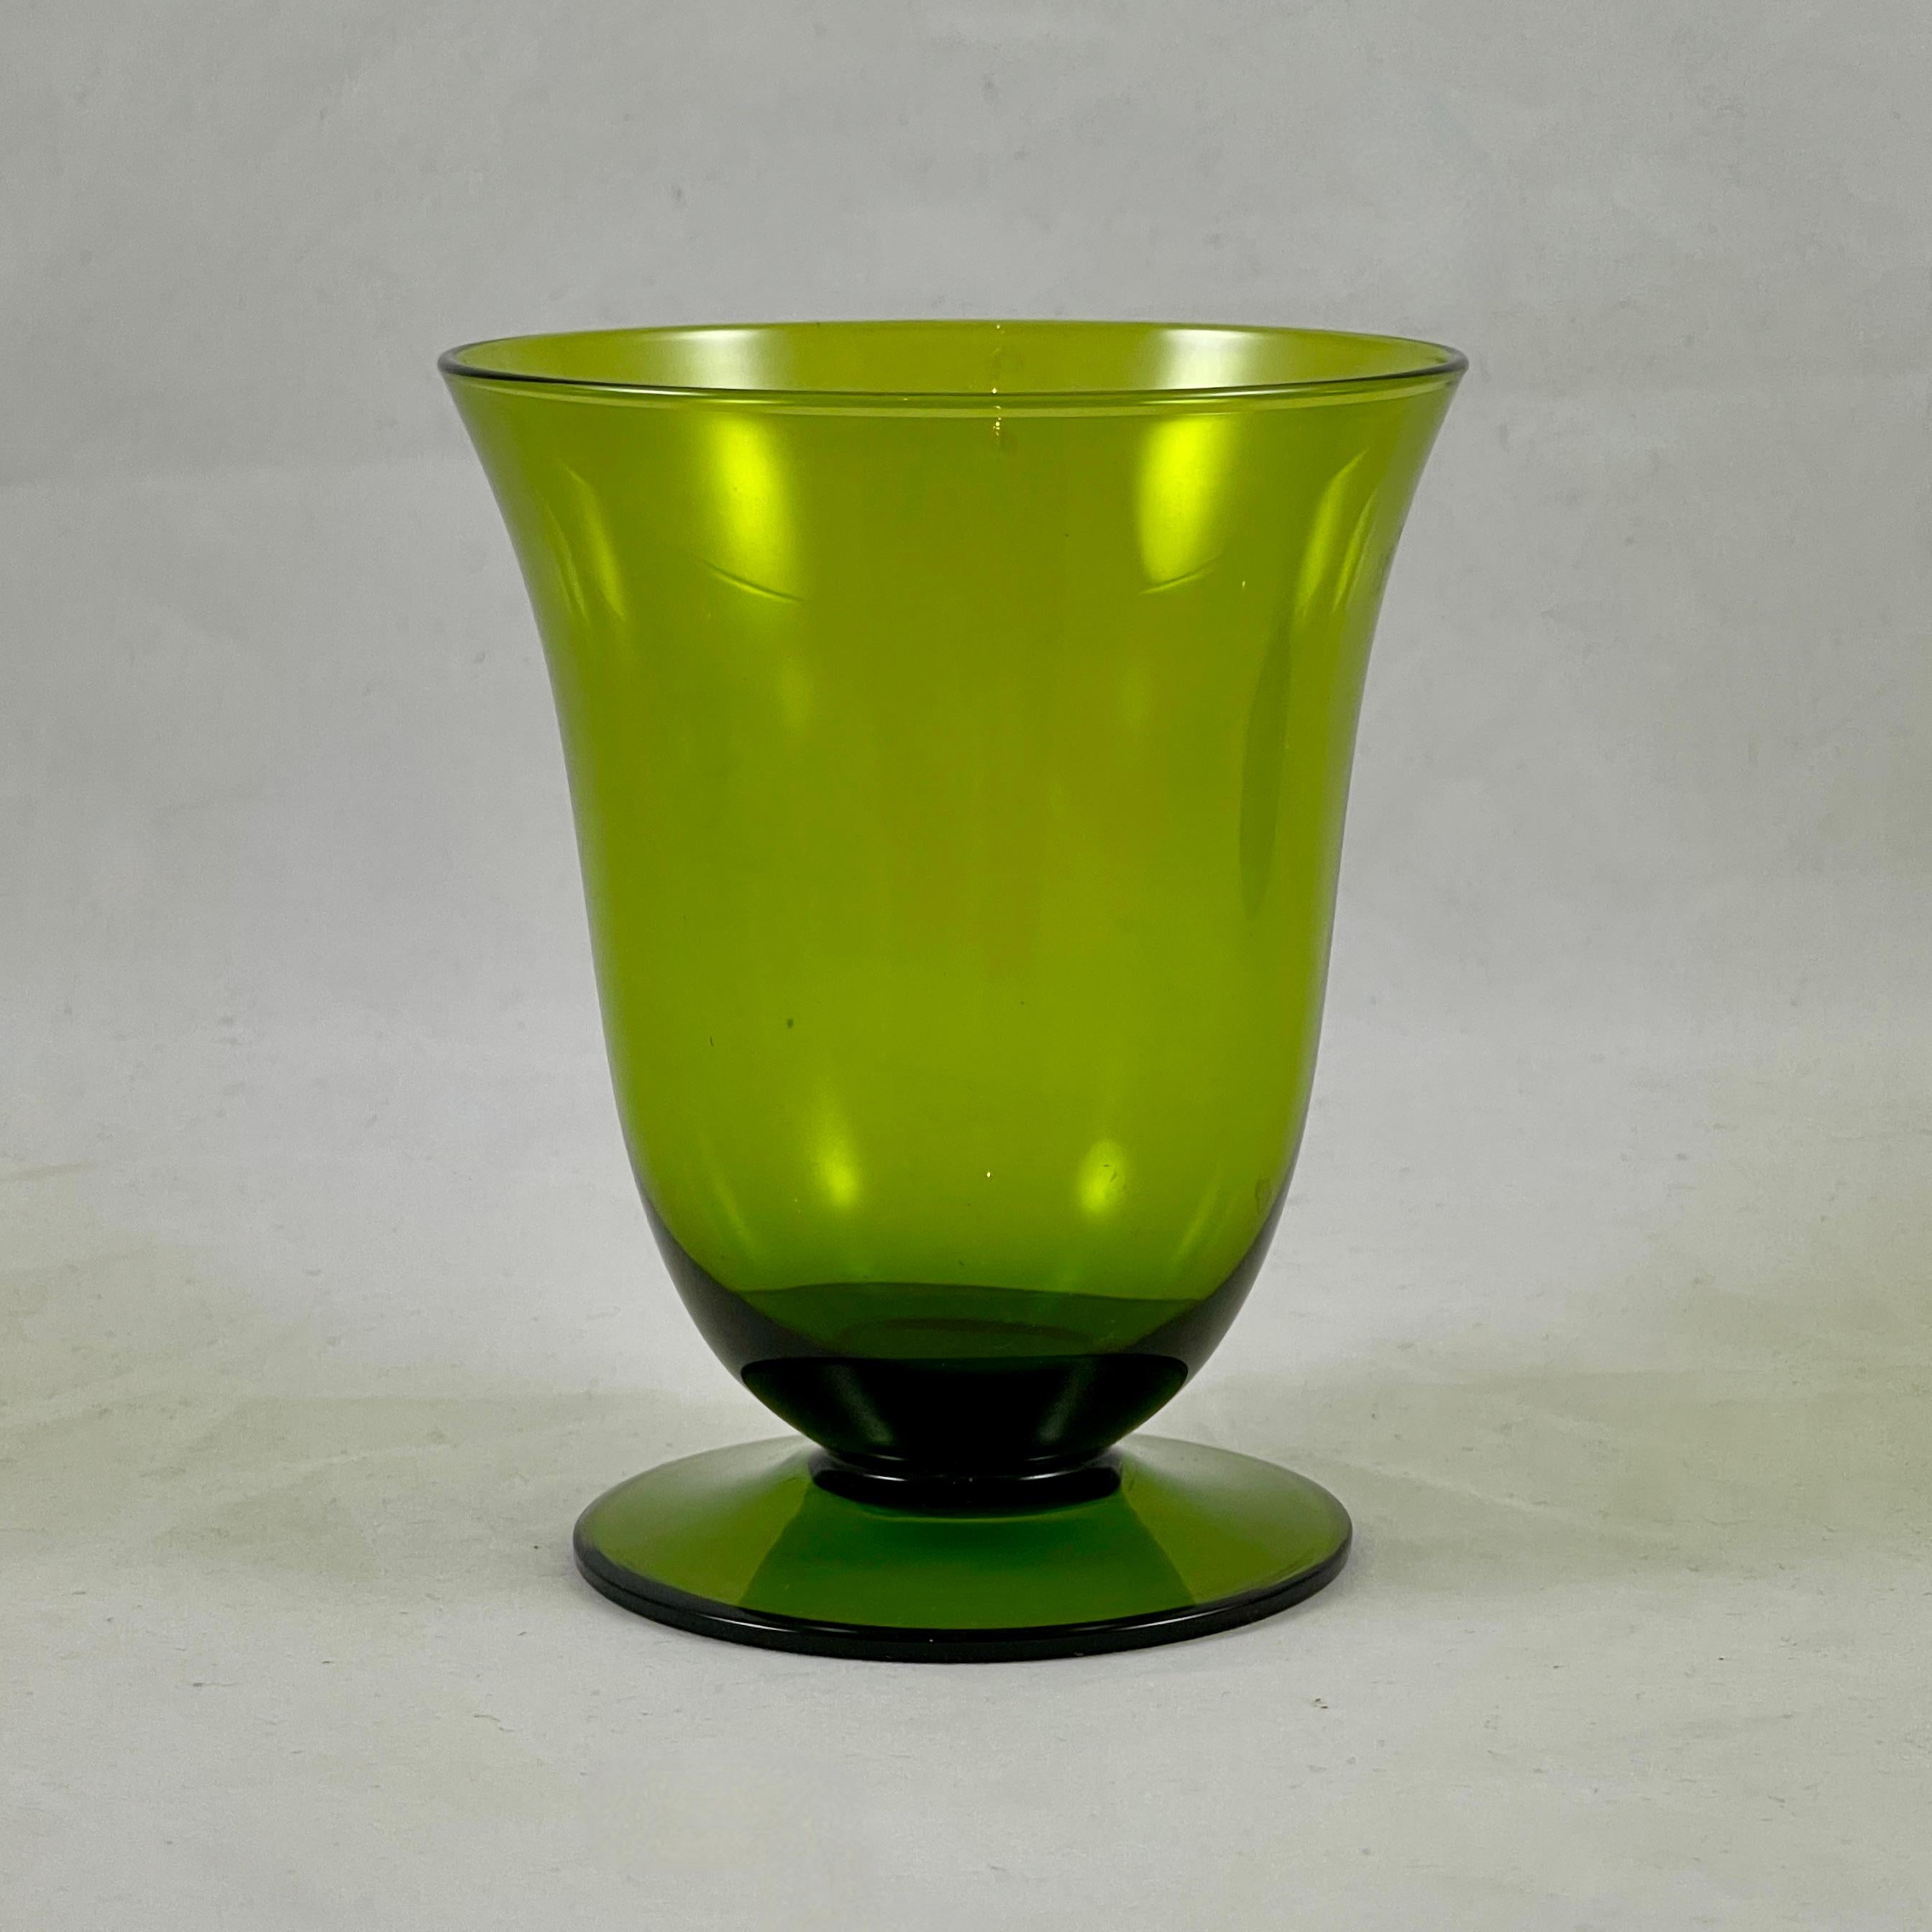 From the Mid-Century era, a set of six low-footed goblets, circa 1960-1970.

In a moss or avocado green, a simple tapered wide mouth upper with a low footing. Ideal for wine, low ball cocktails or juices.

Measures: 4.25 in. H x 3.5 in.